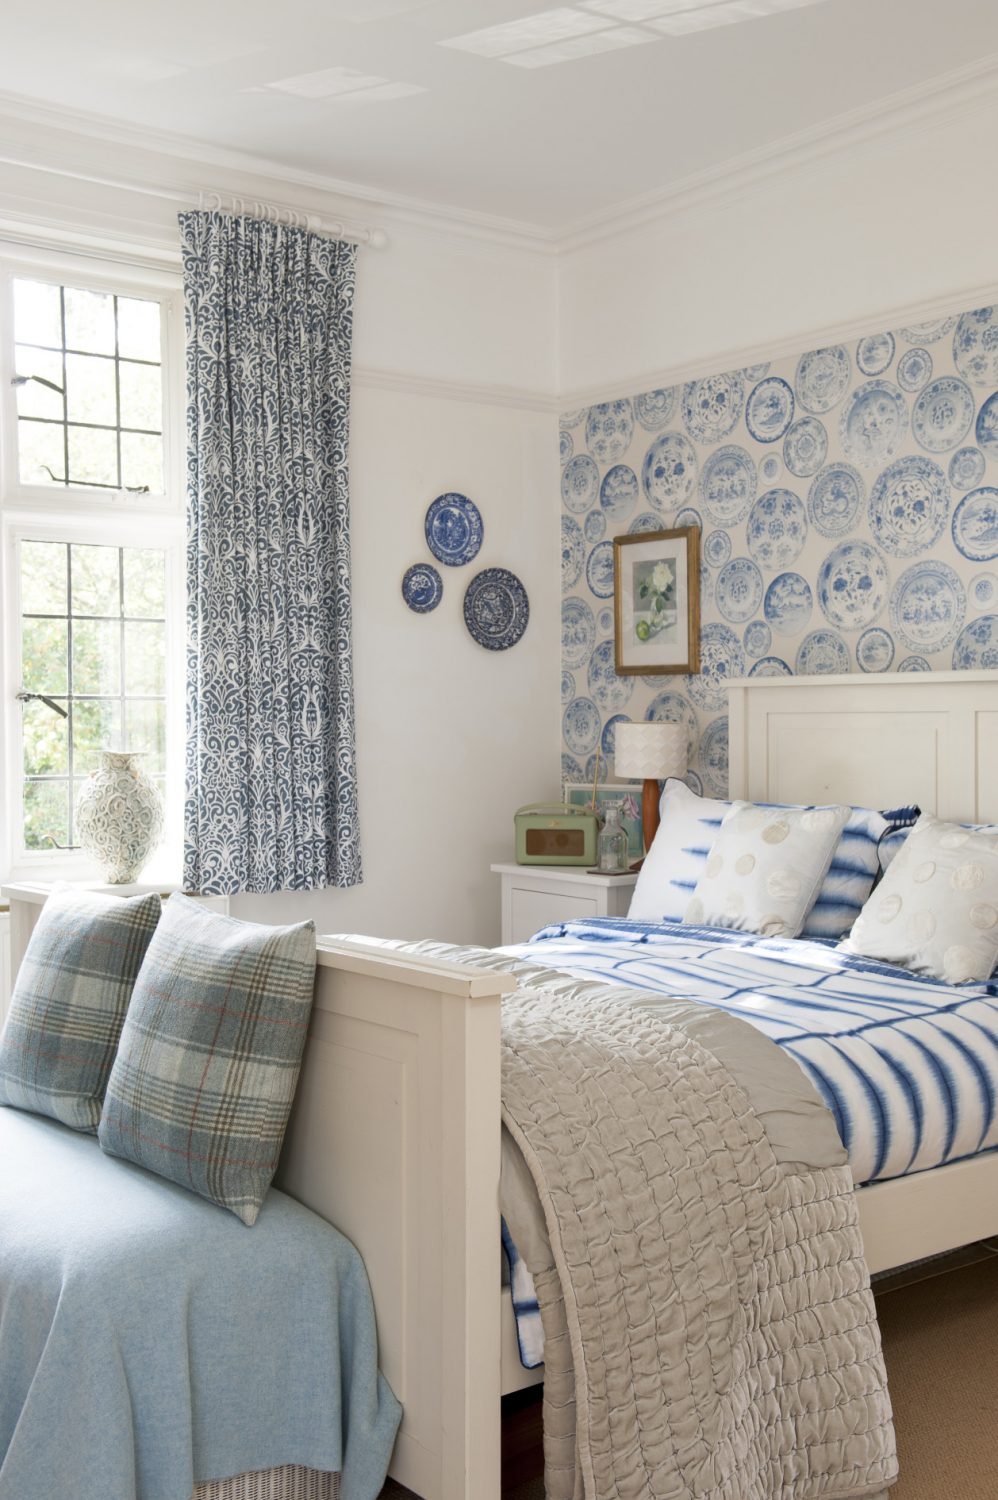 At the end of the landing is a really pretty guest room which features an Andrew Martin willow pattern plate design wallpaper, colours from which have been picked up in curtains, throws and cushions